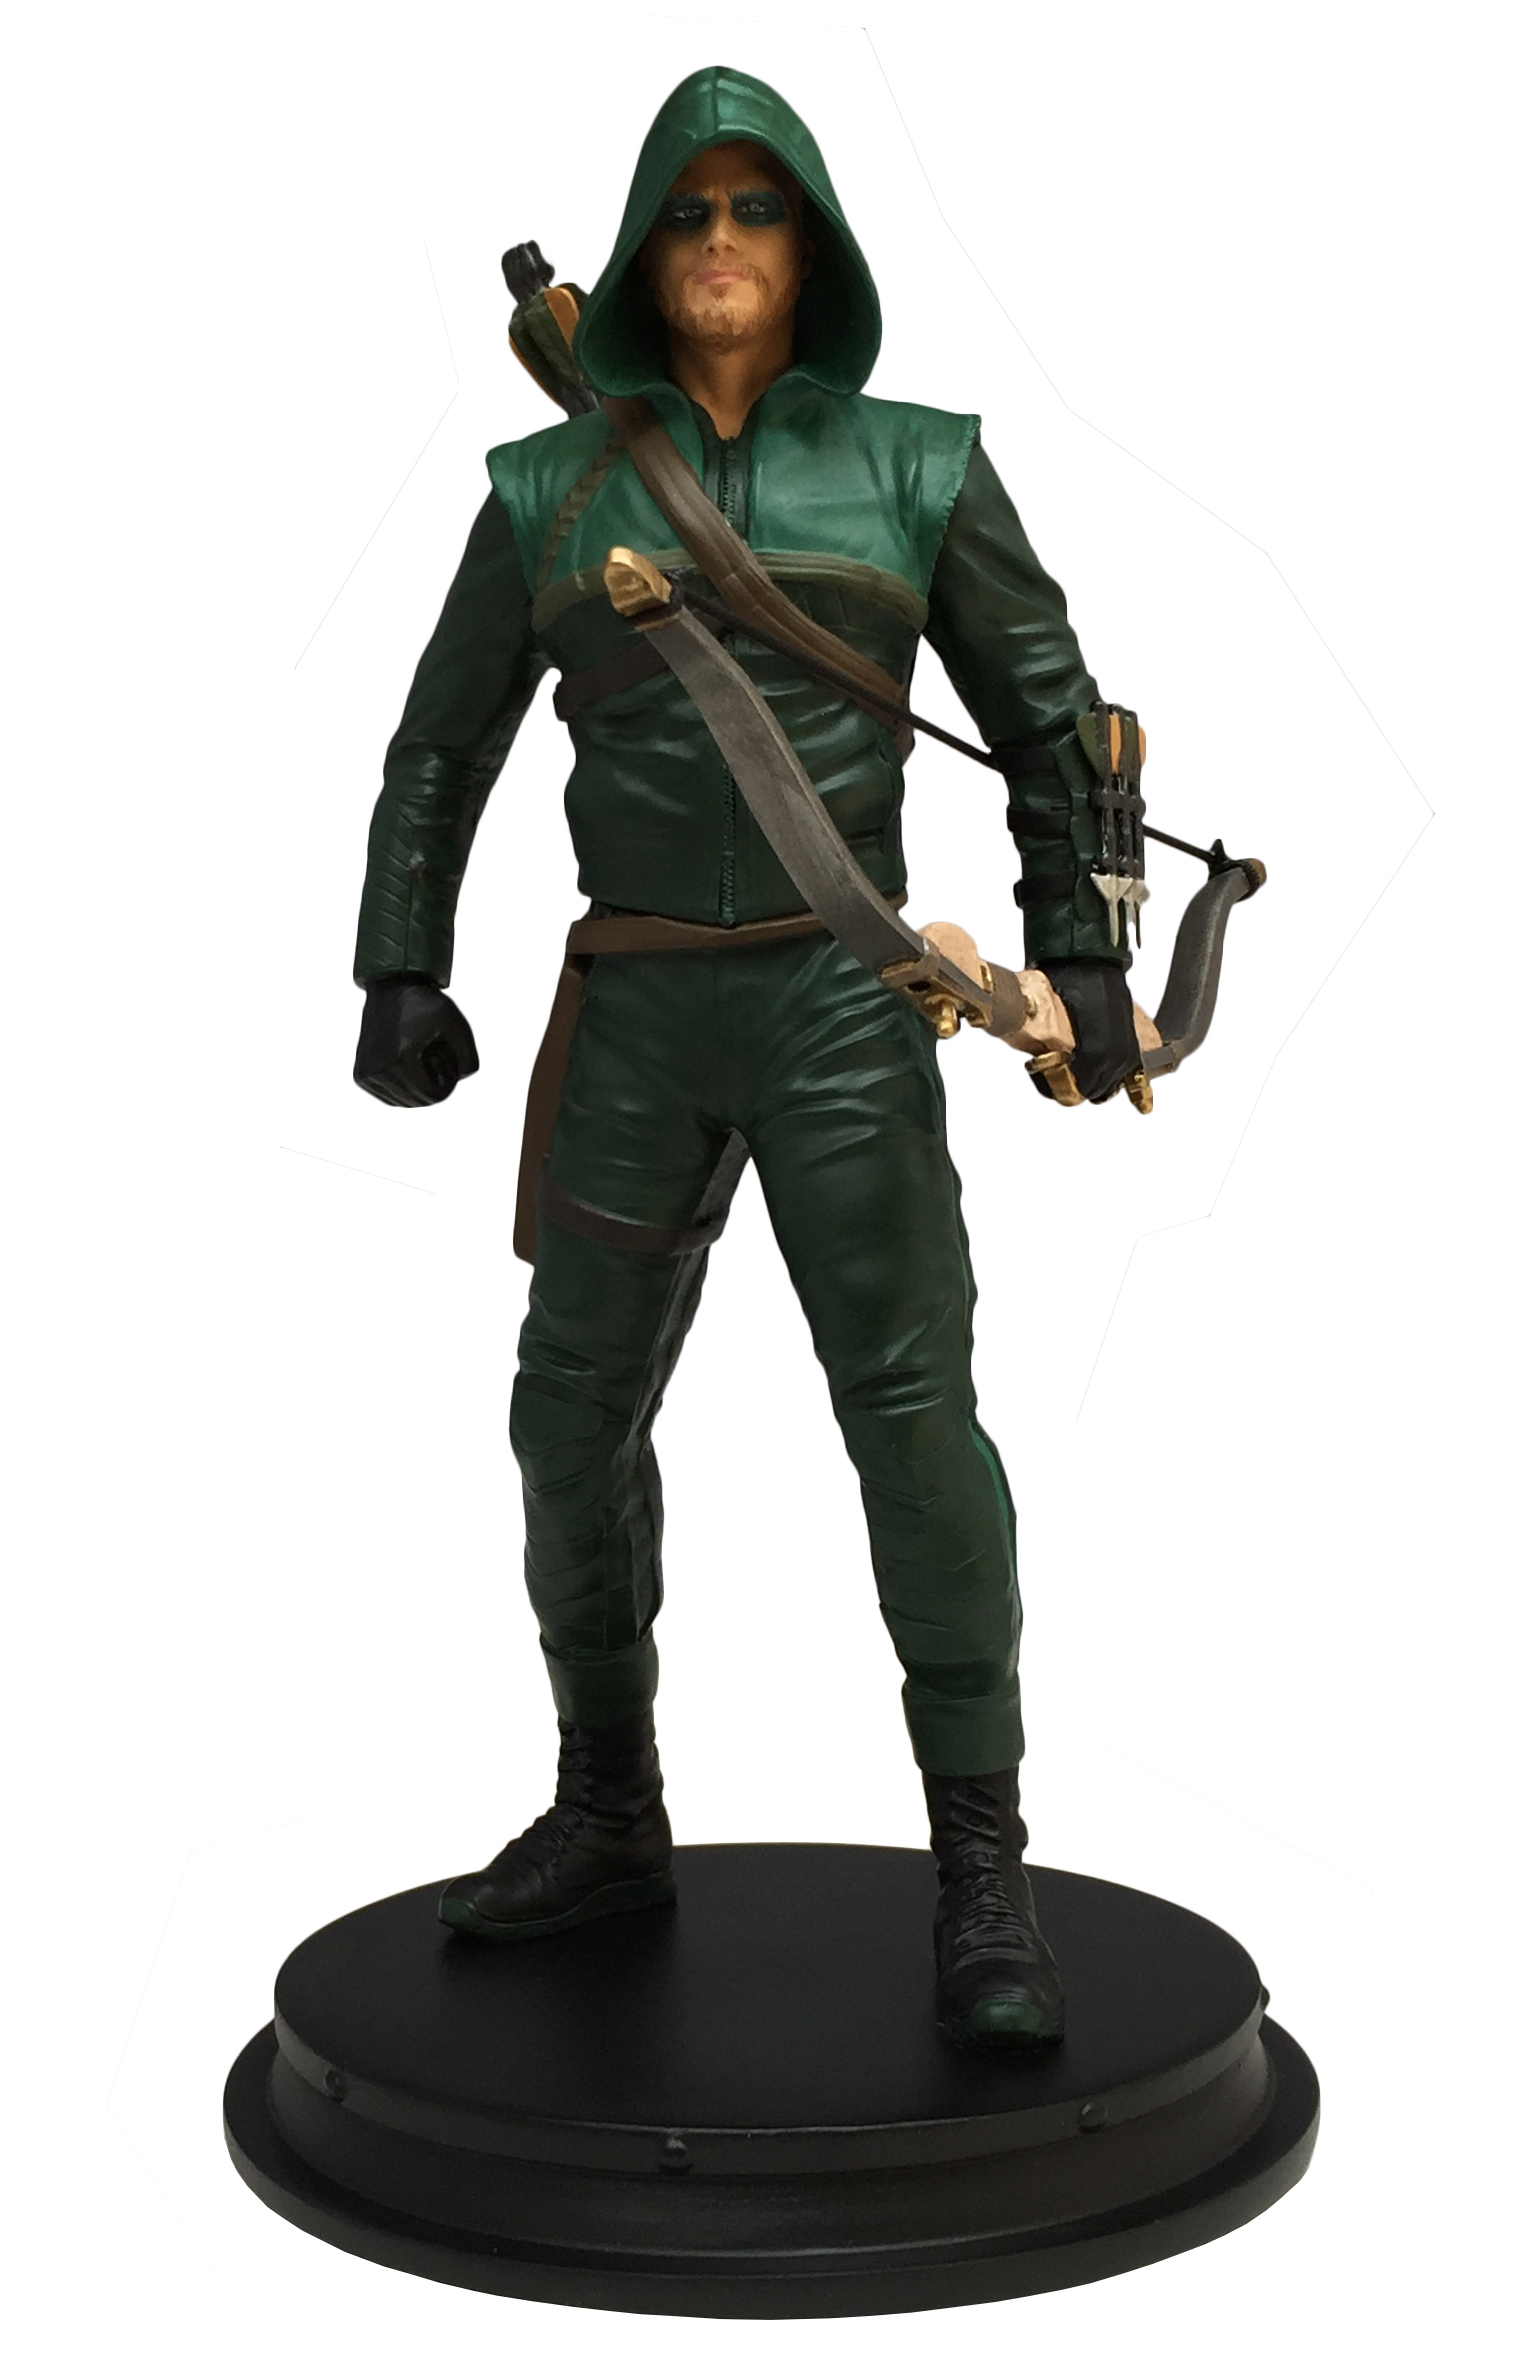 STK683412 Exclusive Stephen Amell Arrow and Grant Gustin Flash Statues Revealed